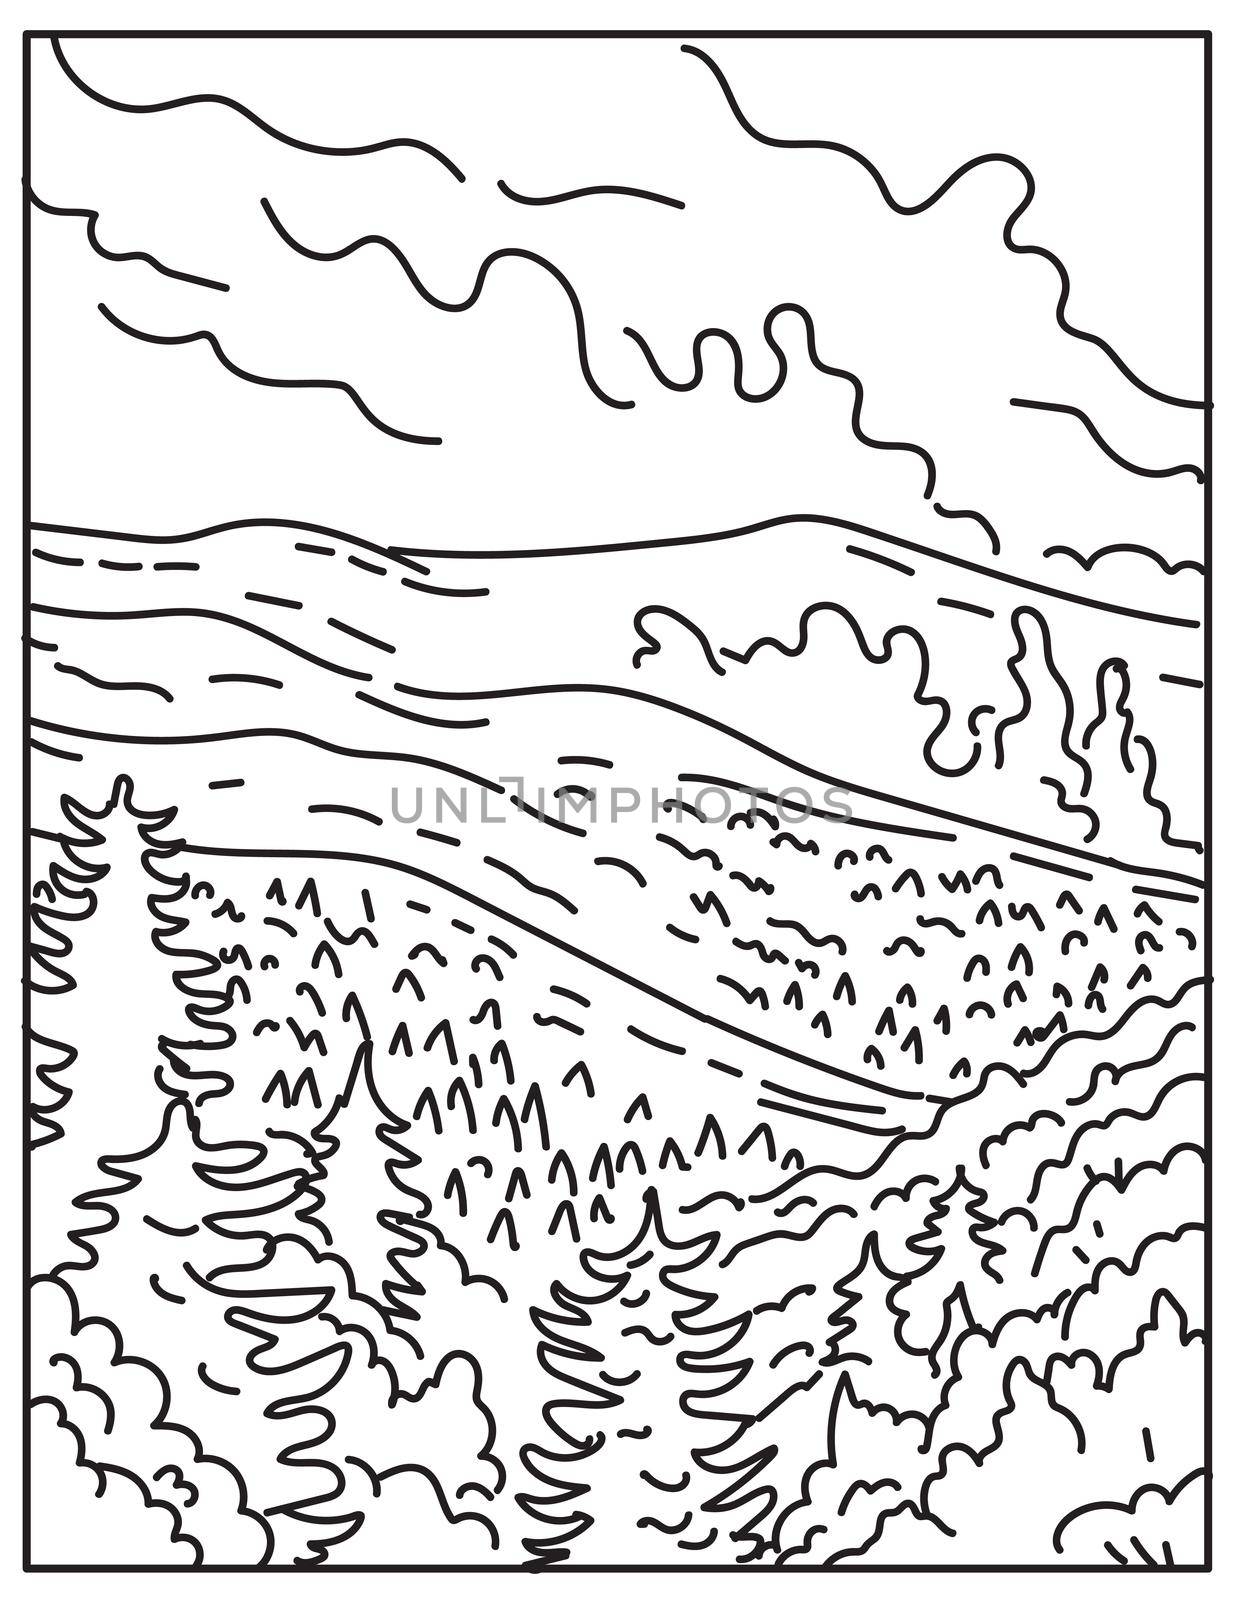 Mono line illustration of Great Smoky Mountains National Park between the border North Carolina and Tennessee, United States of America done in retro black and white monoline line art style.